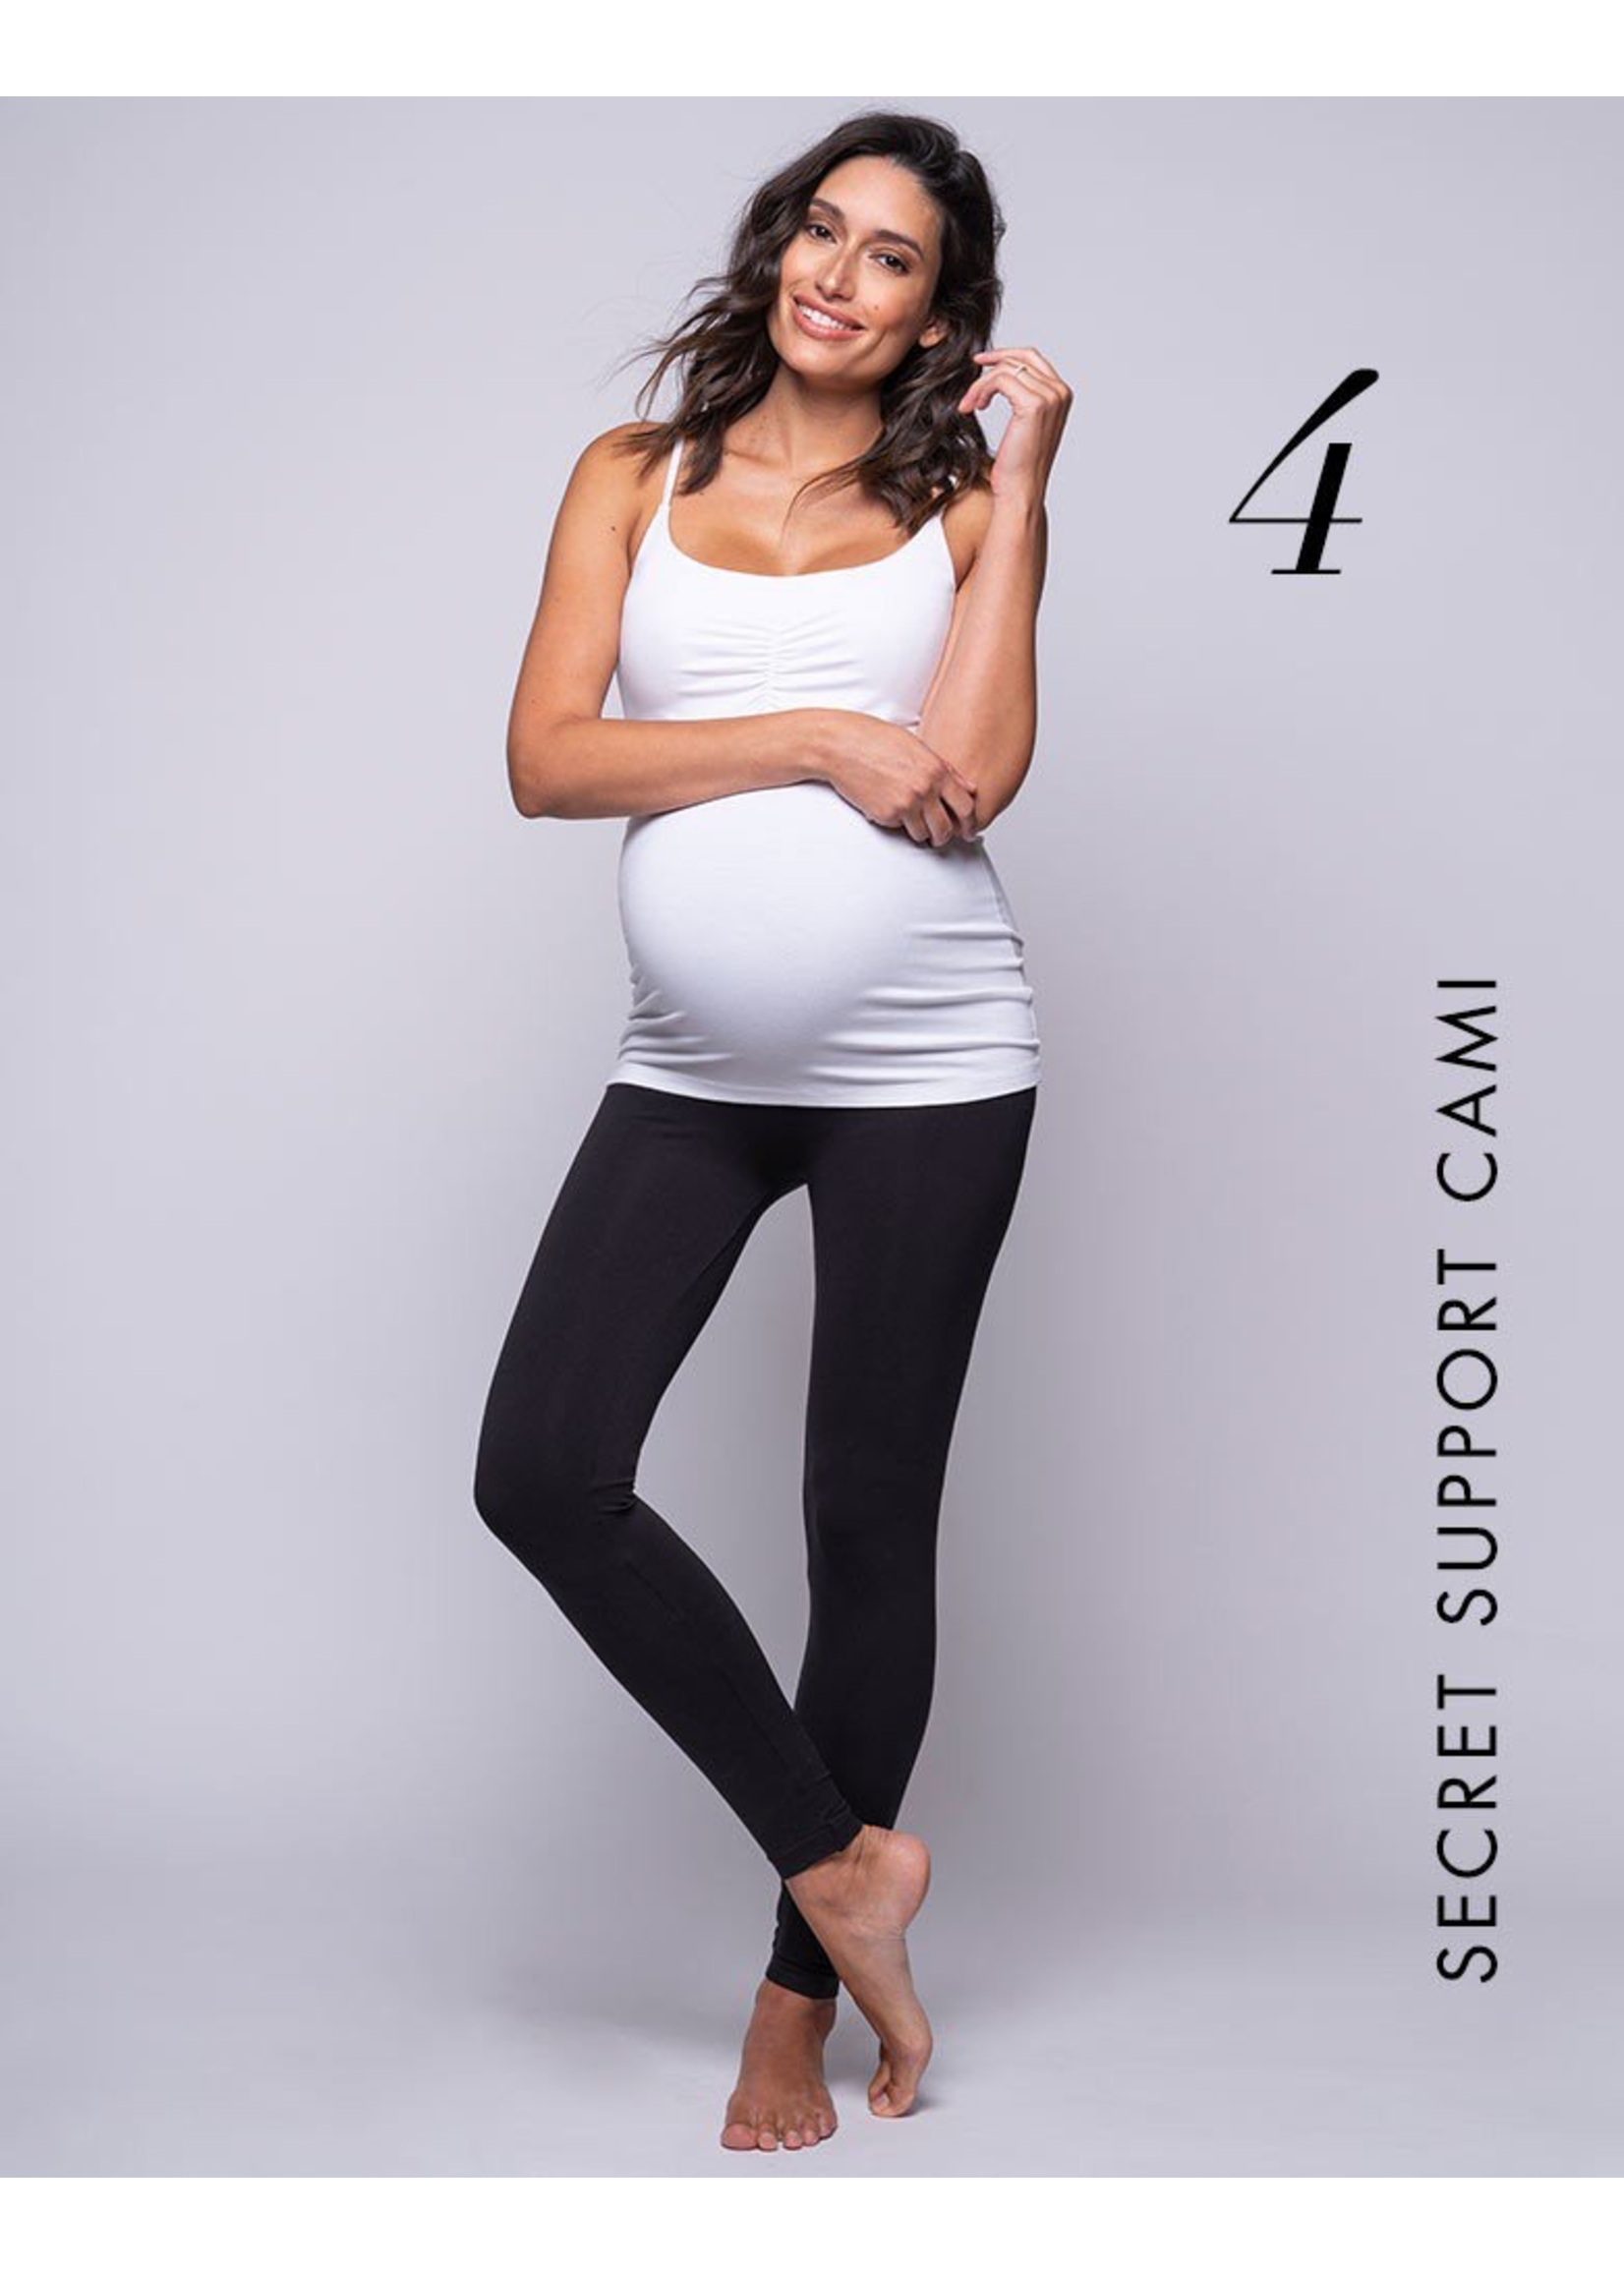 Sydney Pregnancy Exercise Bump Kit by Seraphine